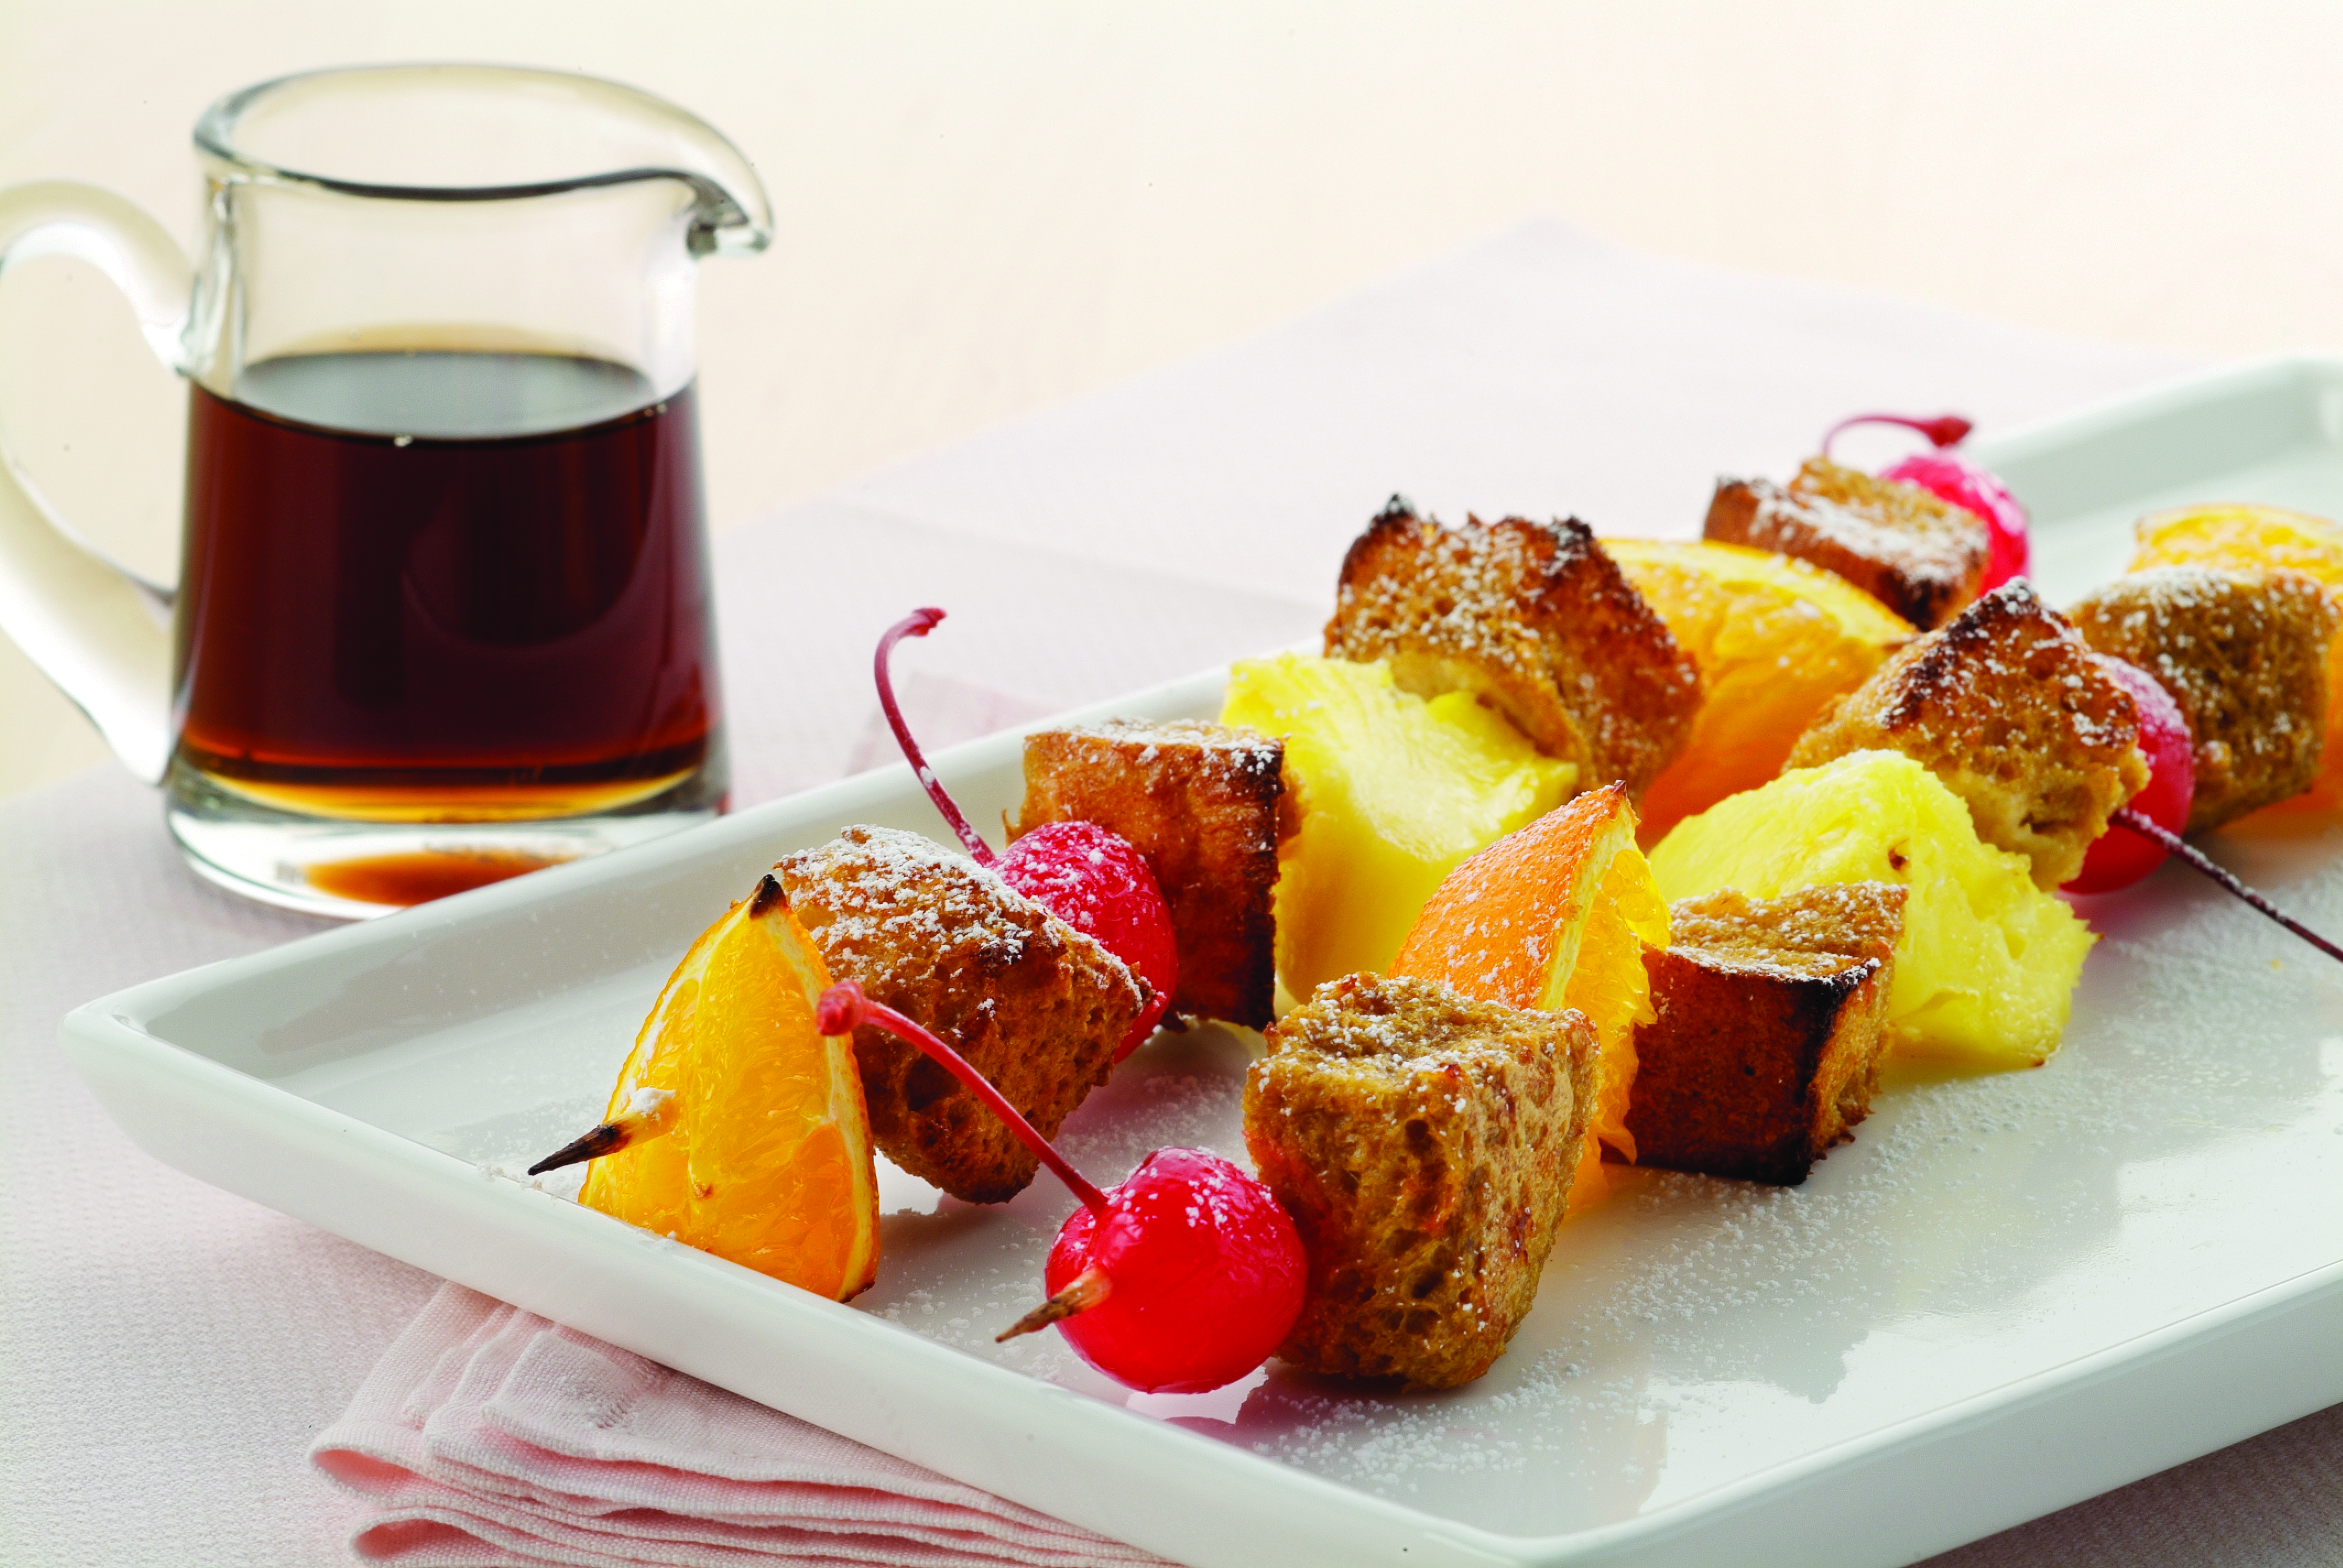 French Toast Skewers